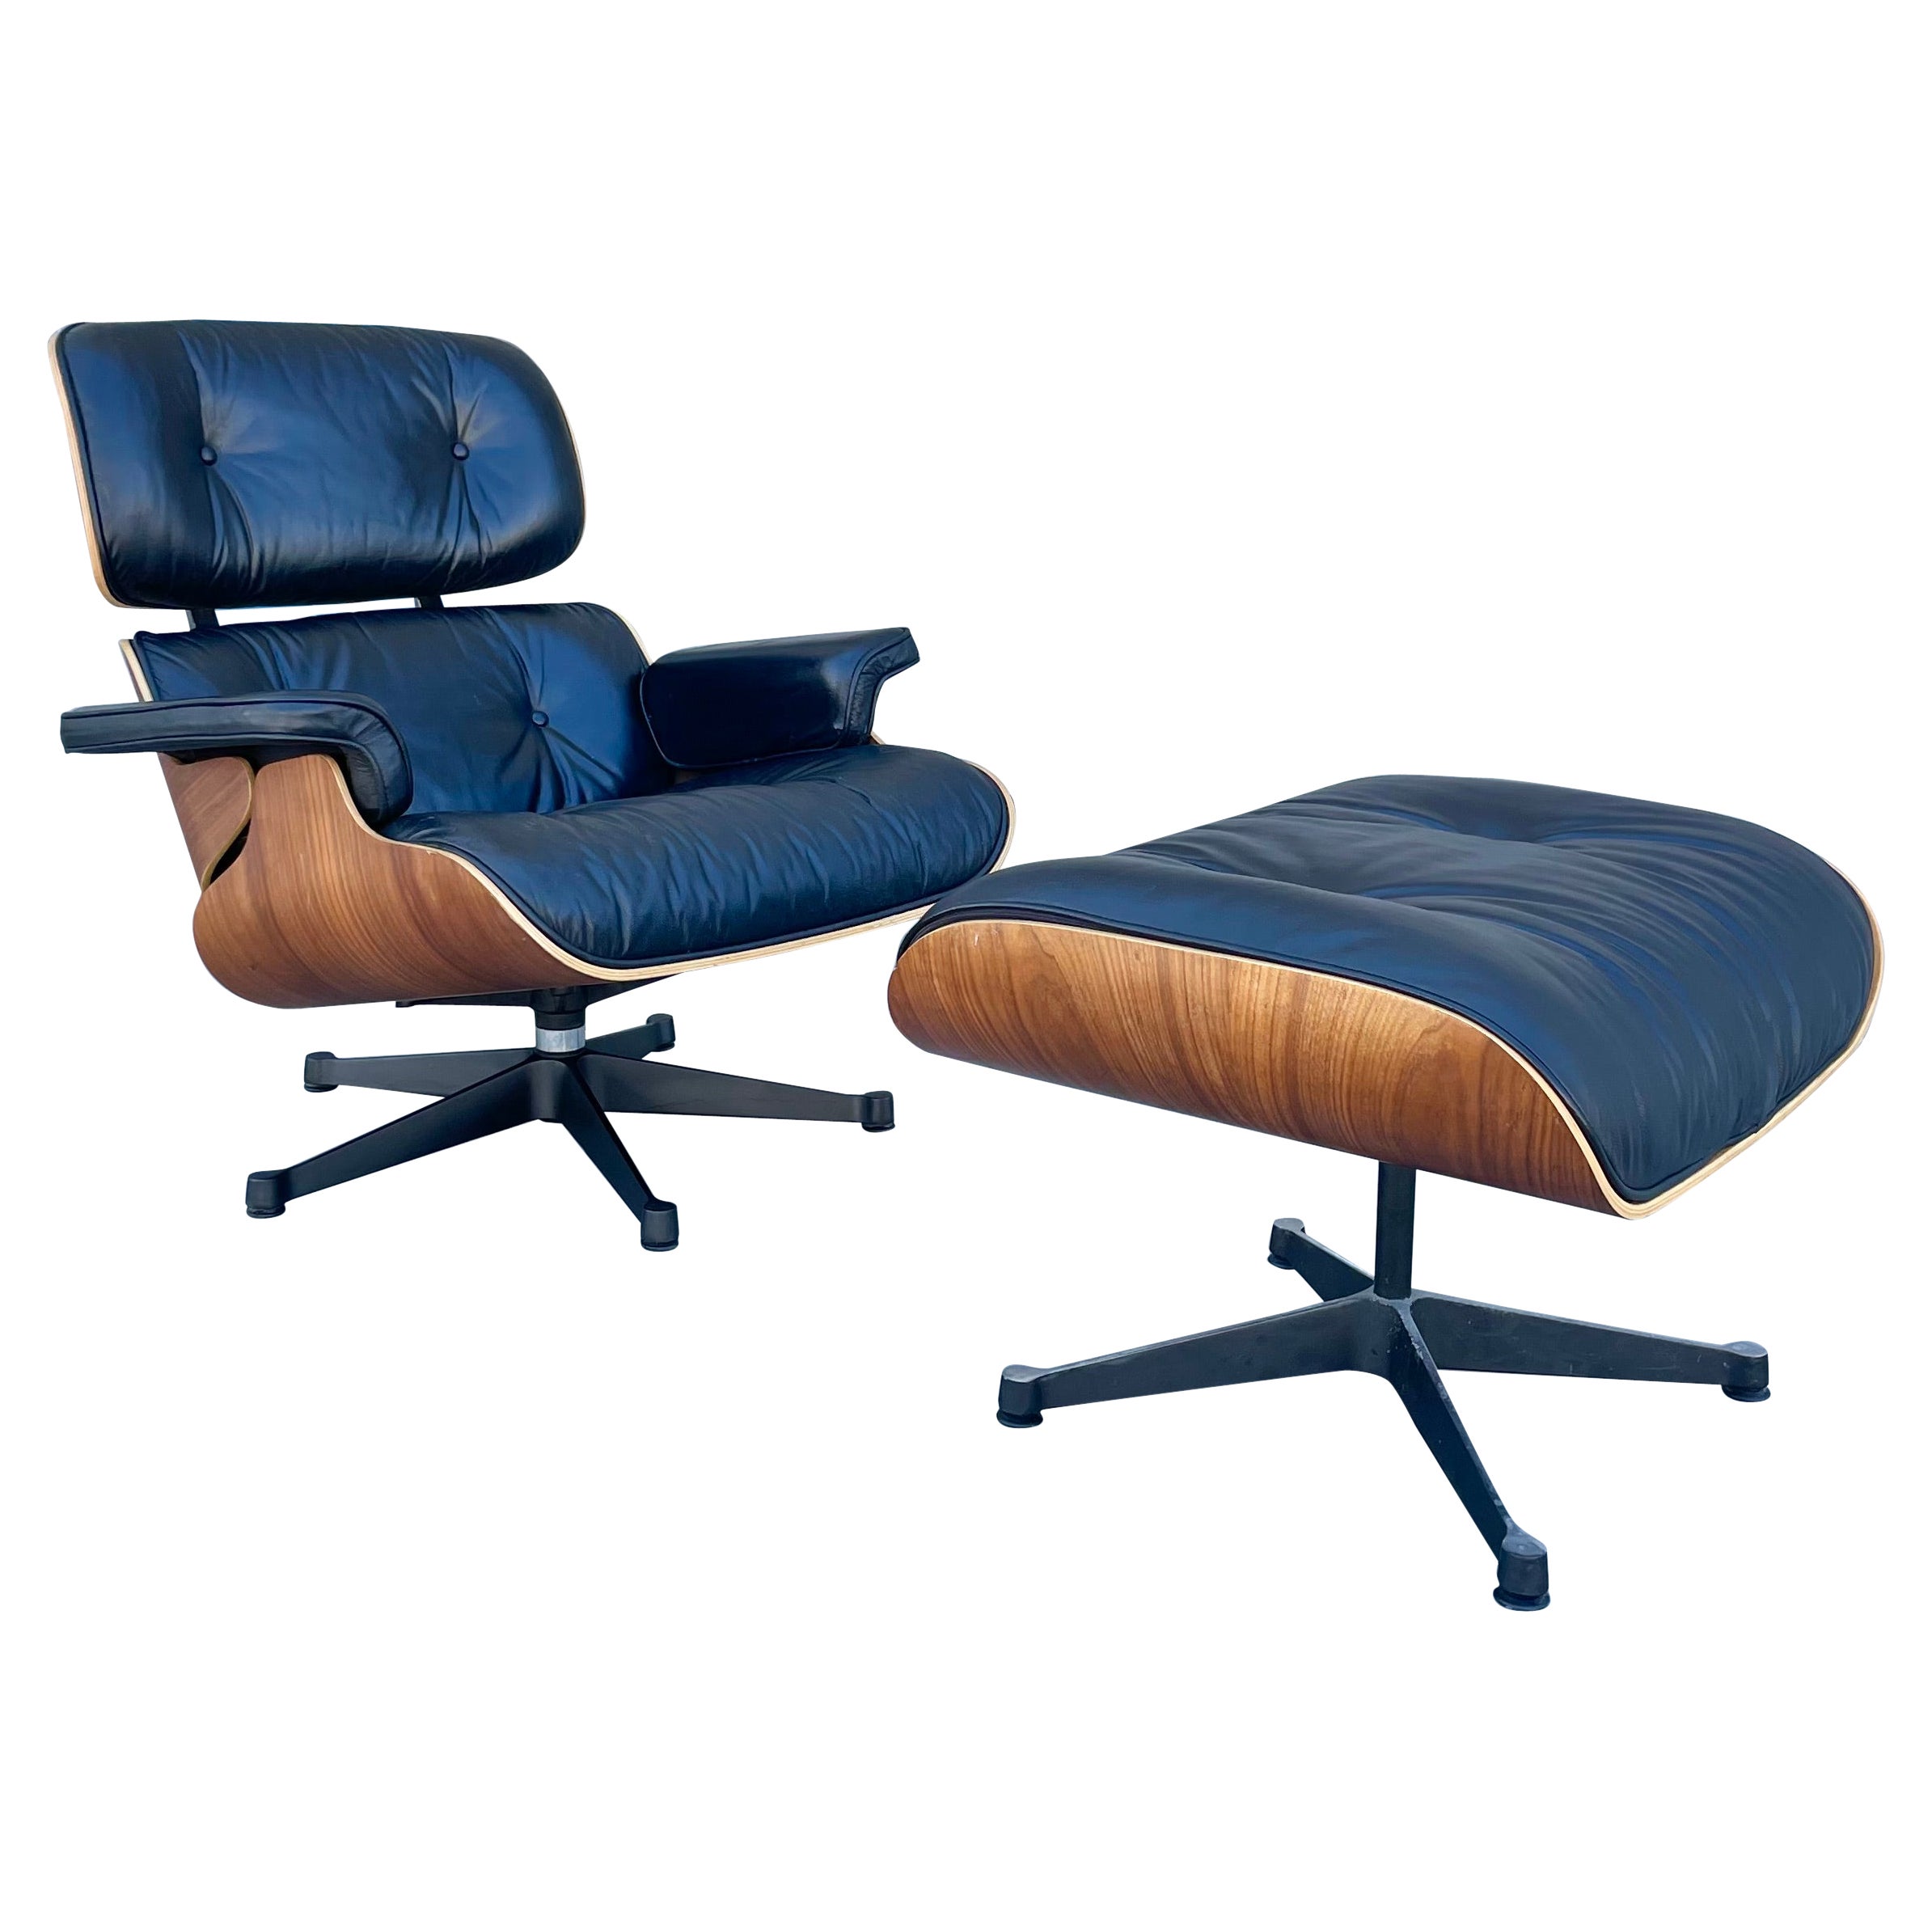 1960s Mid Century Walnut & Leather Lounge Chair by Eames for Vitra - Set of 2 For Sale